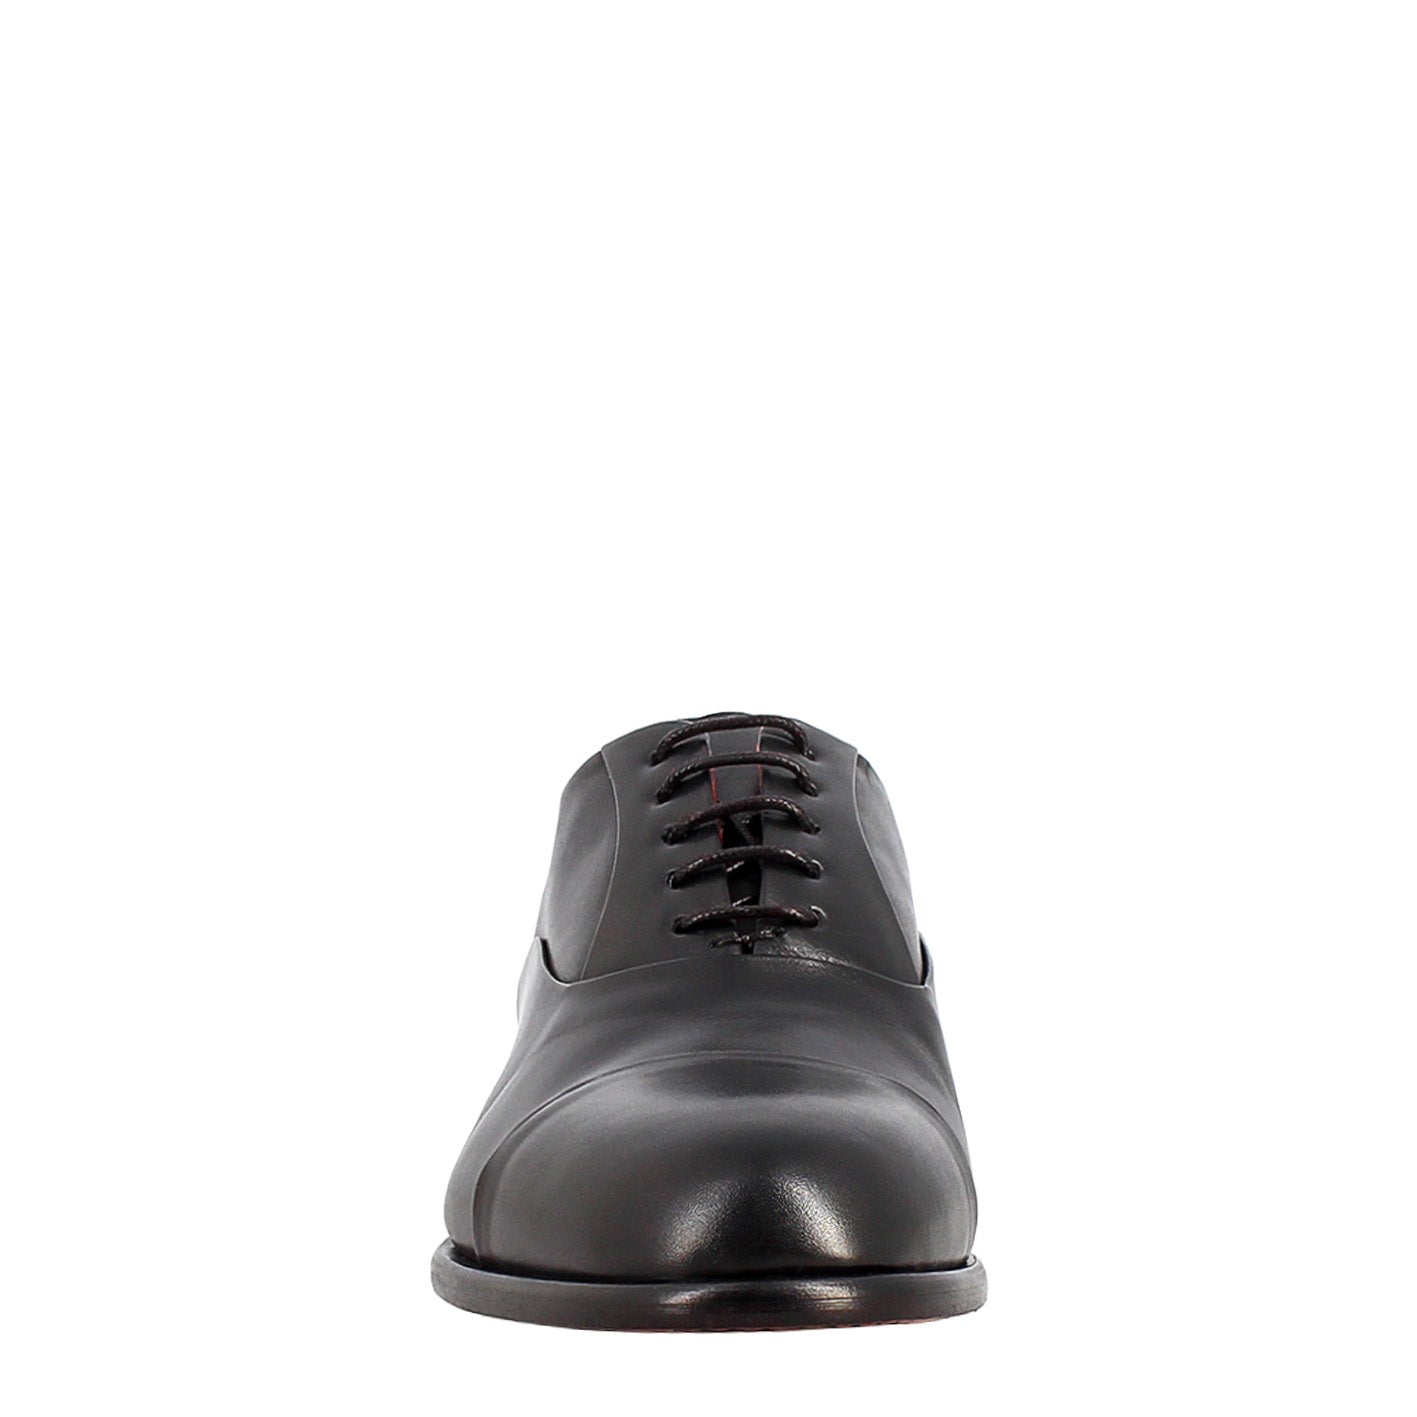 Men's elegant black oxford in leather and red lining